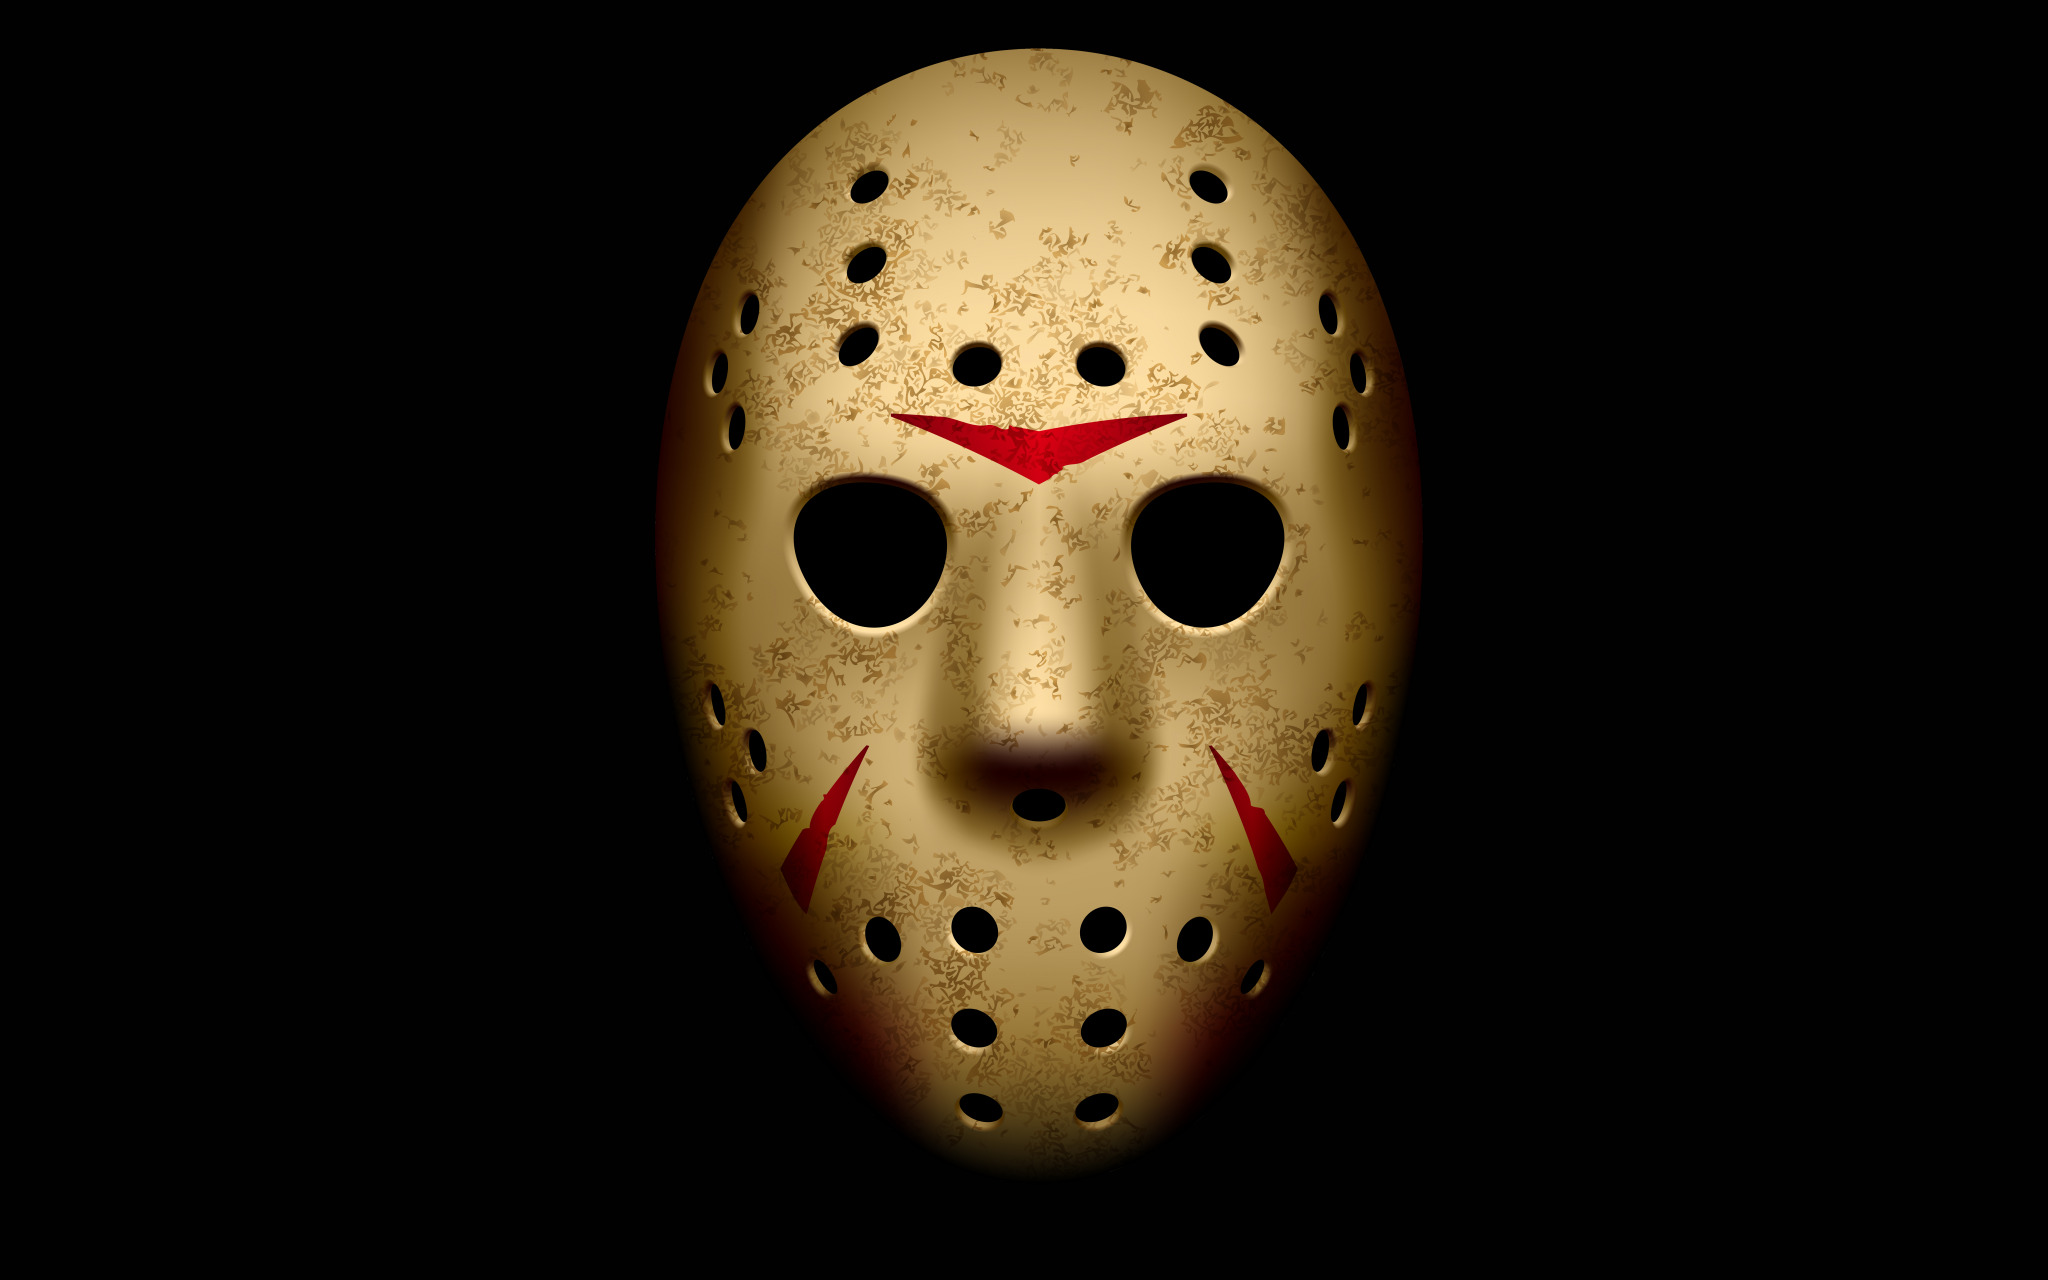 Black Background Jason Voorhees Friday The 13th Mask 2048x1280